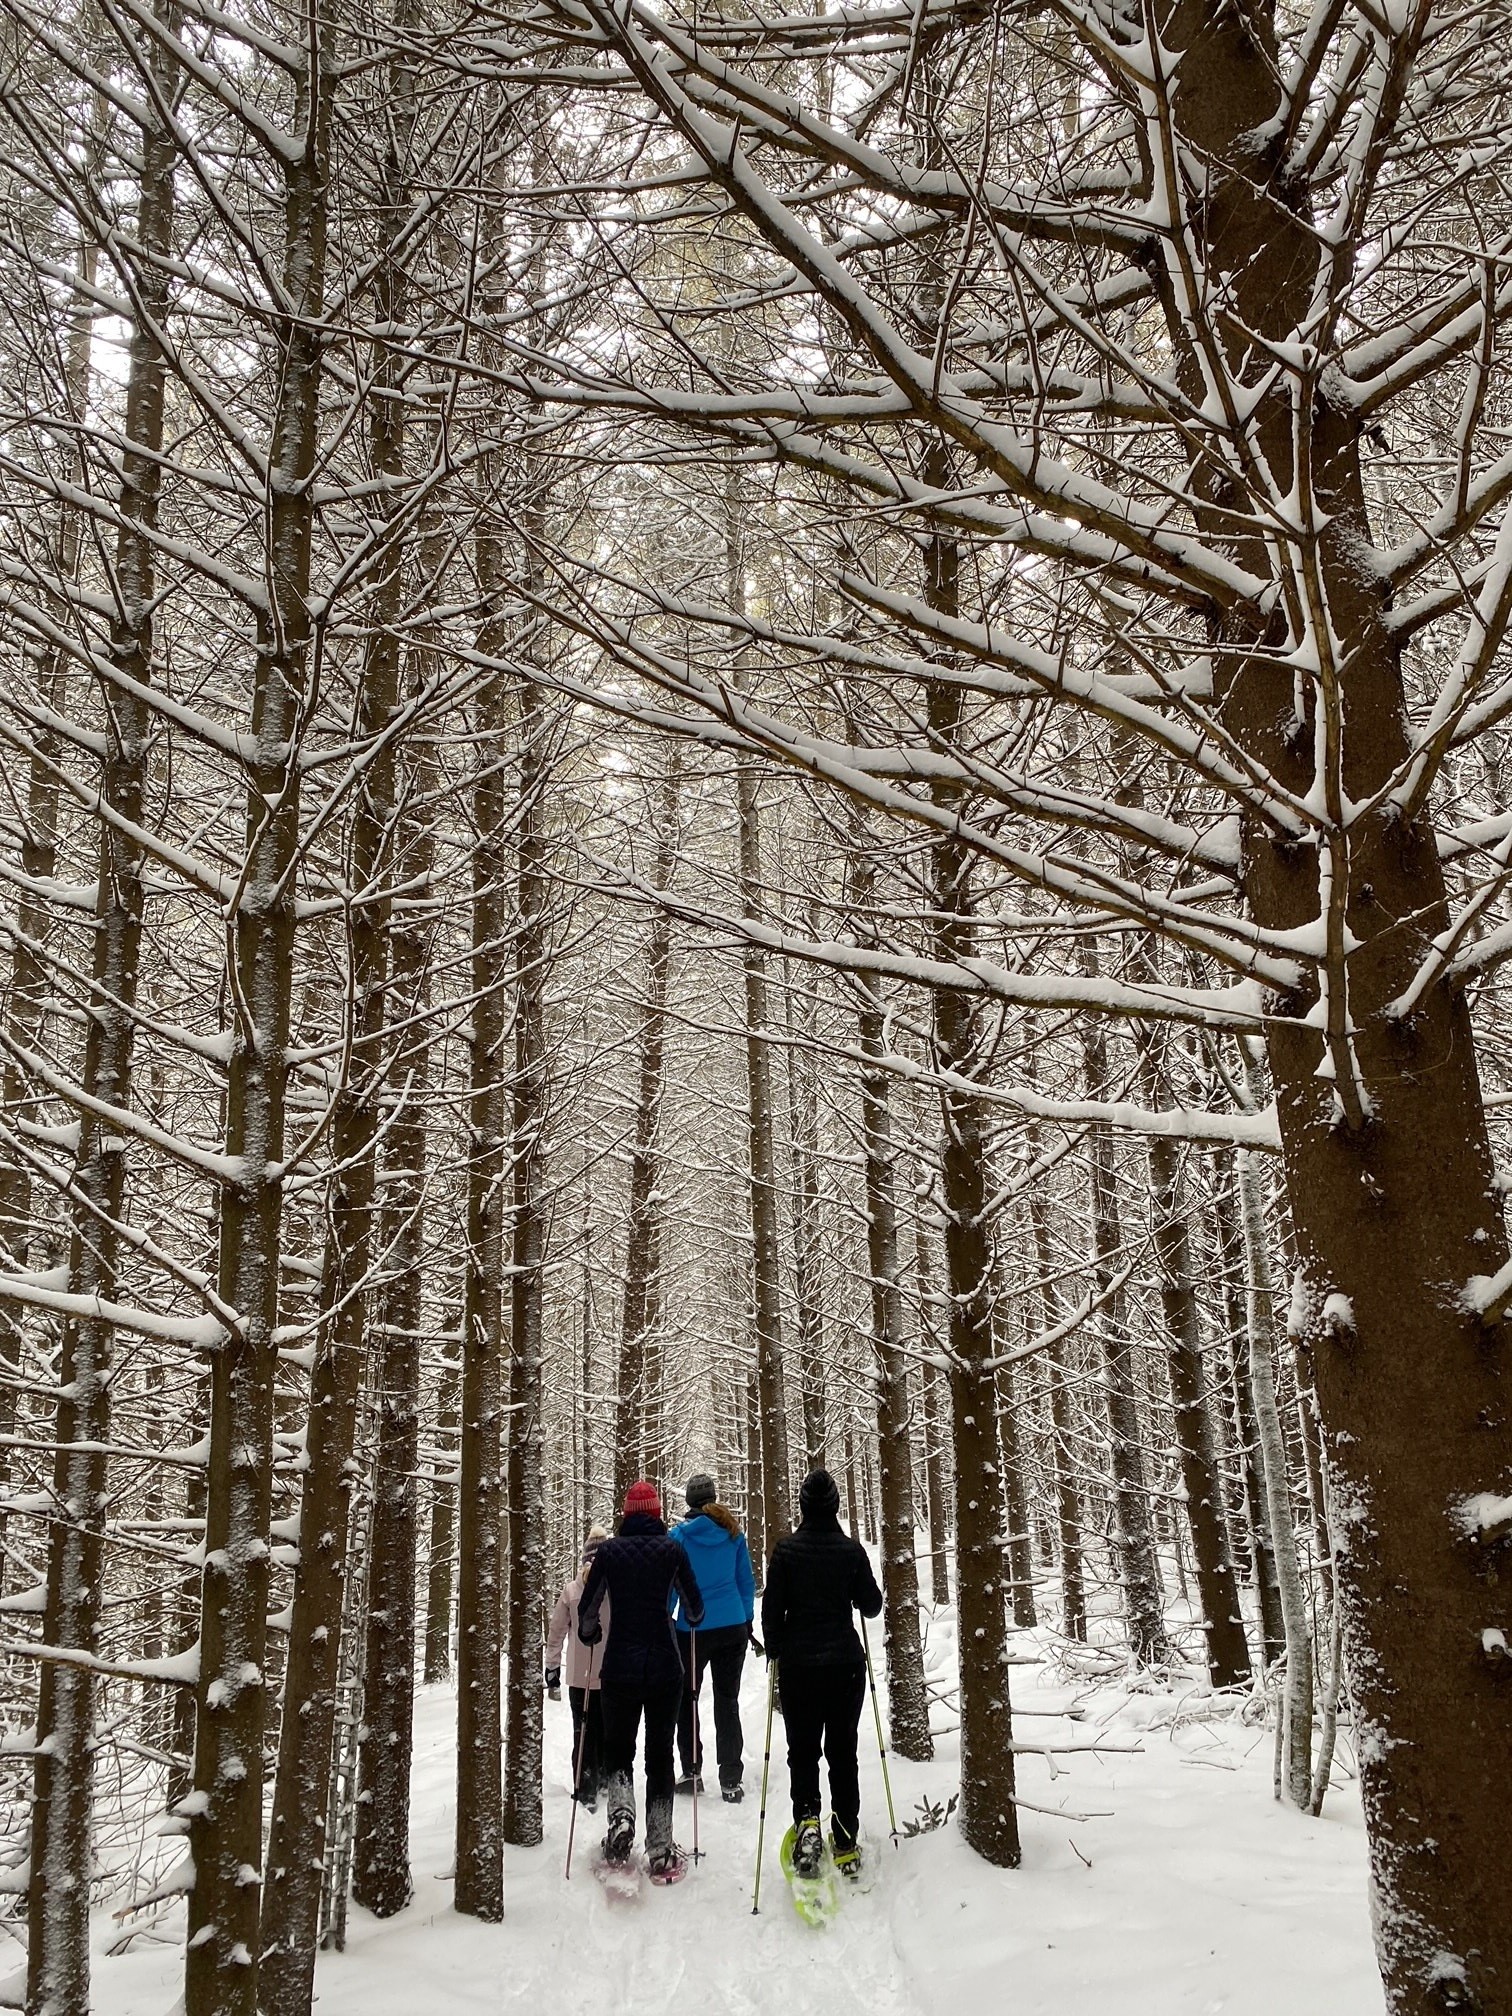 Group snowshoeing through snow covered trees